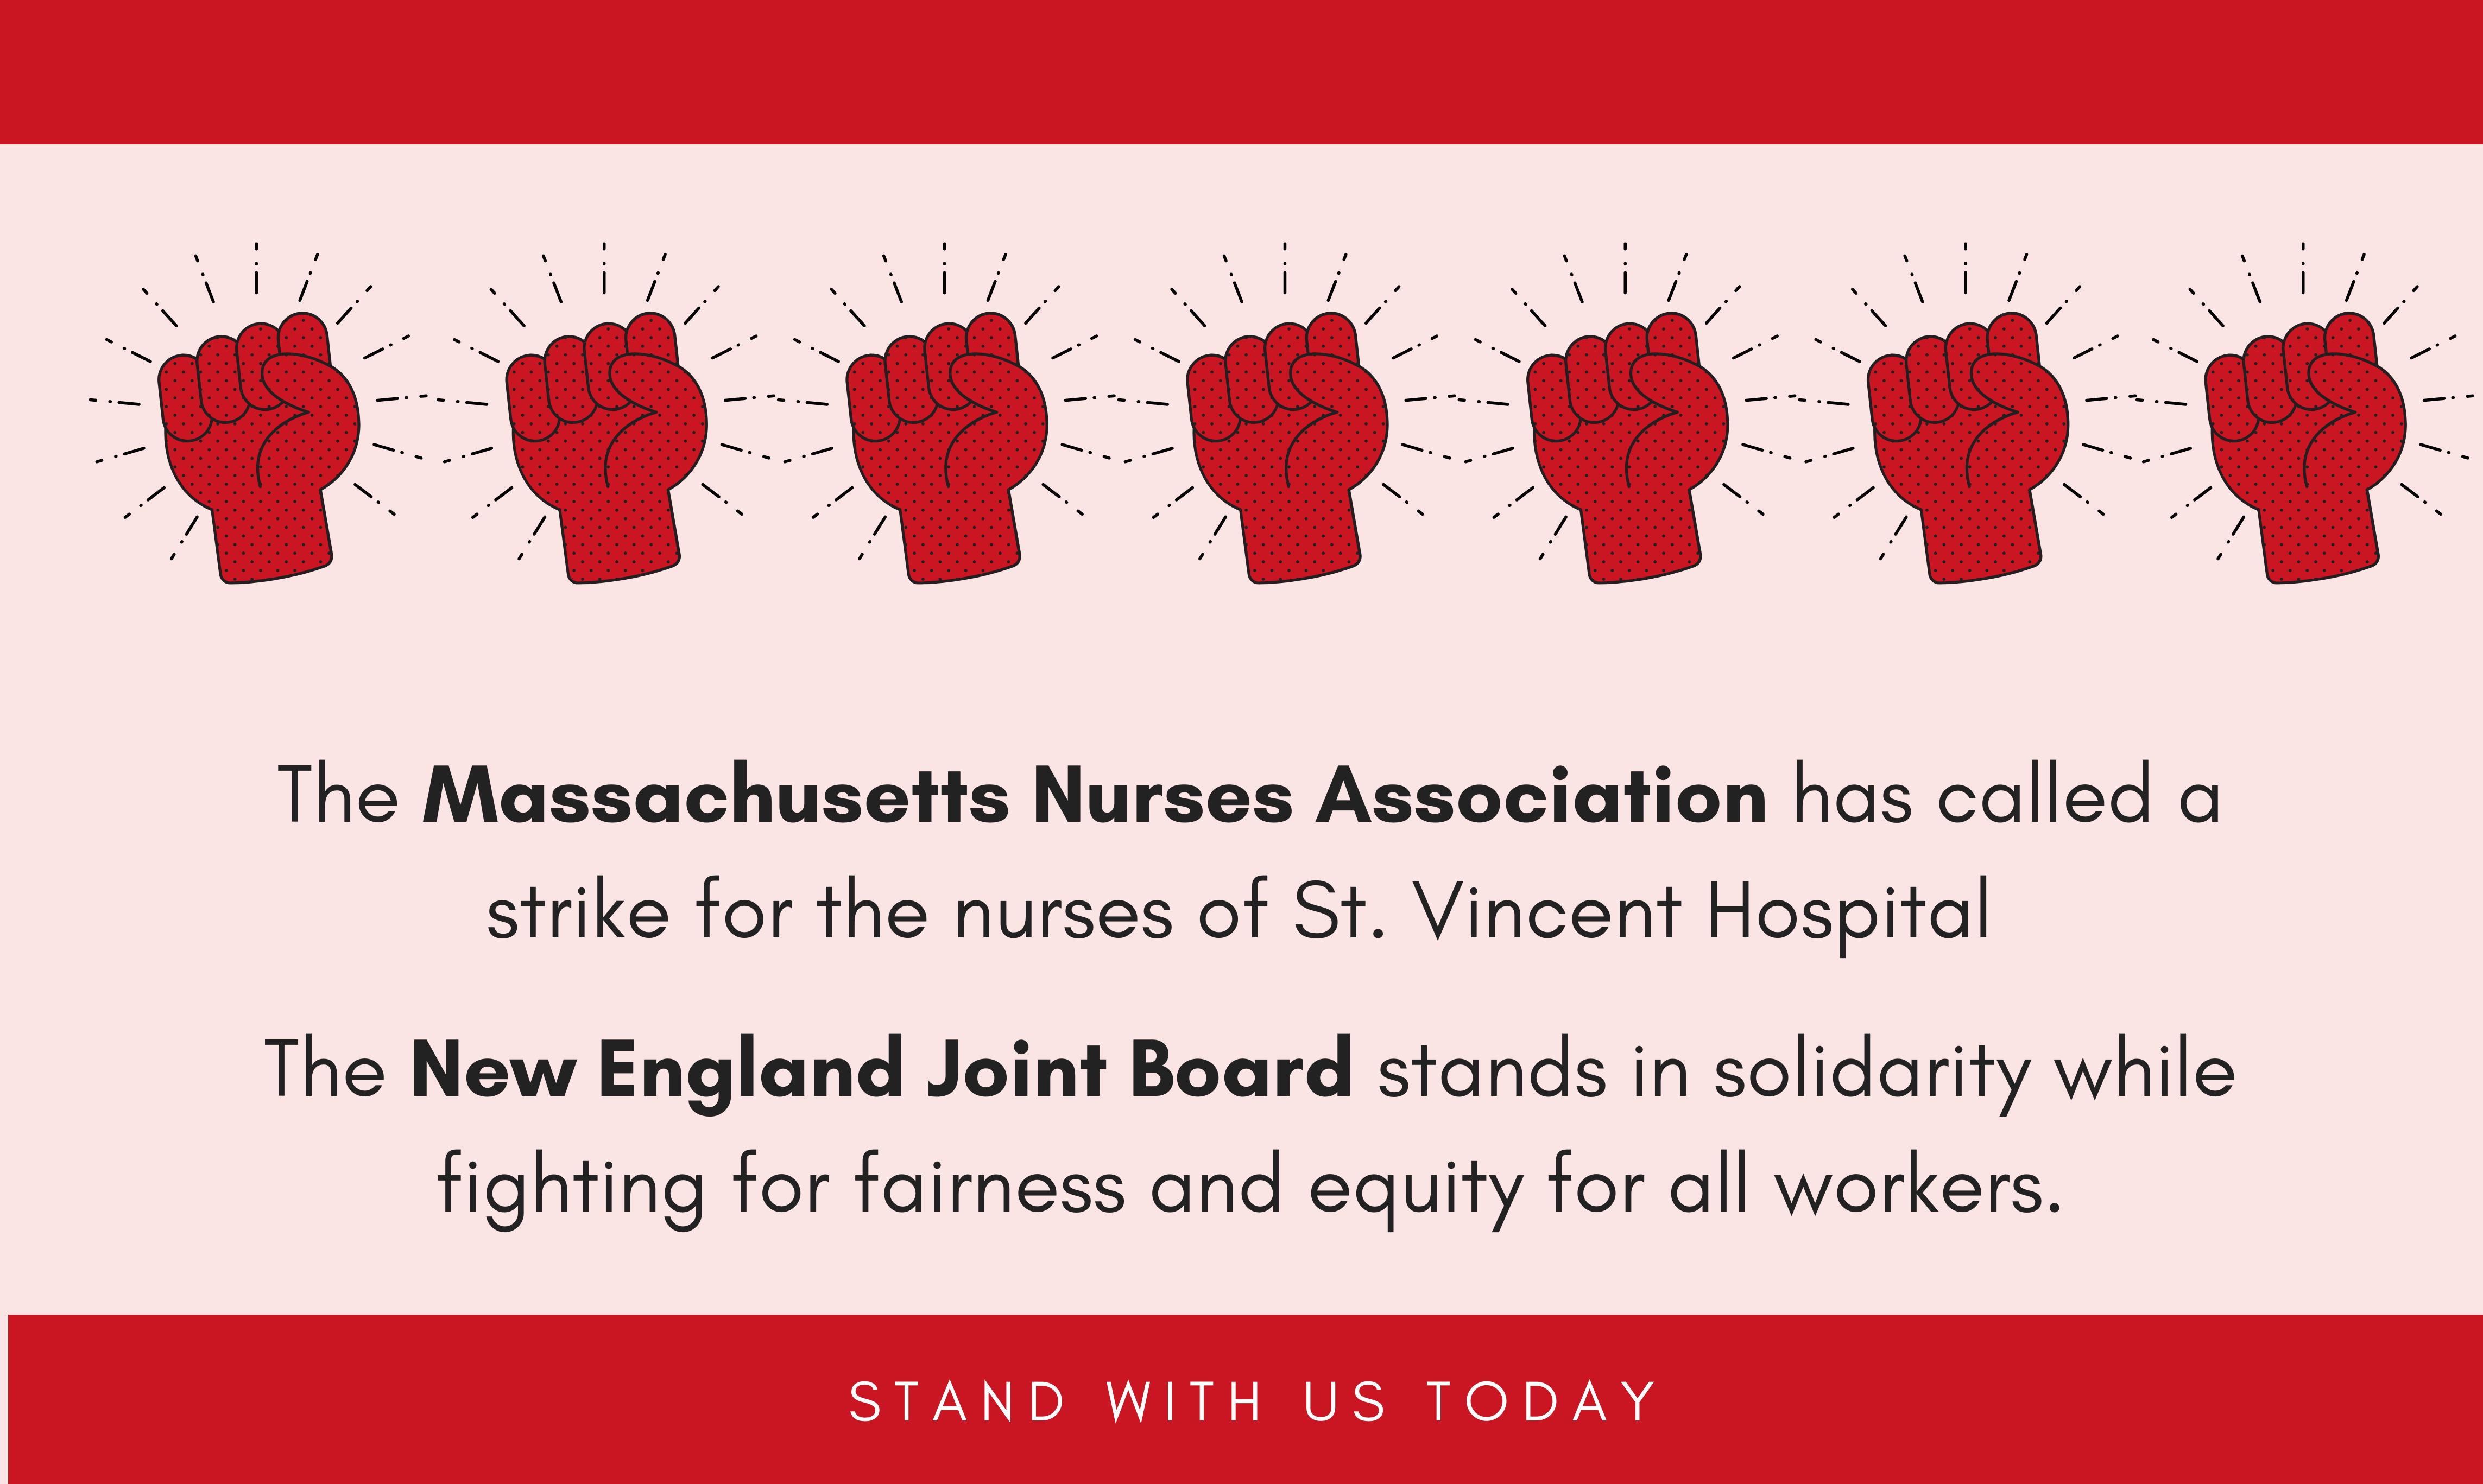 The Massachusetts Nurses Association has called a strike for the nurses of St. Vincent Hospital The New England Joint Board stands in solidarity while fighting for fairness and equity for all workers.